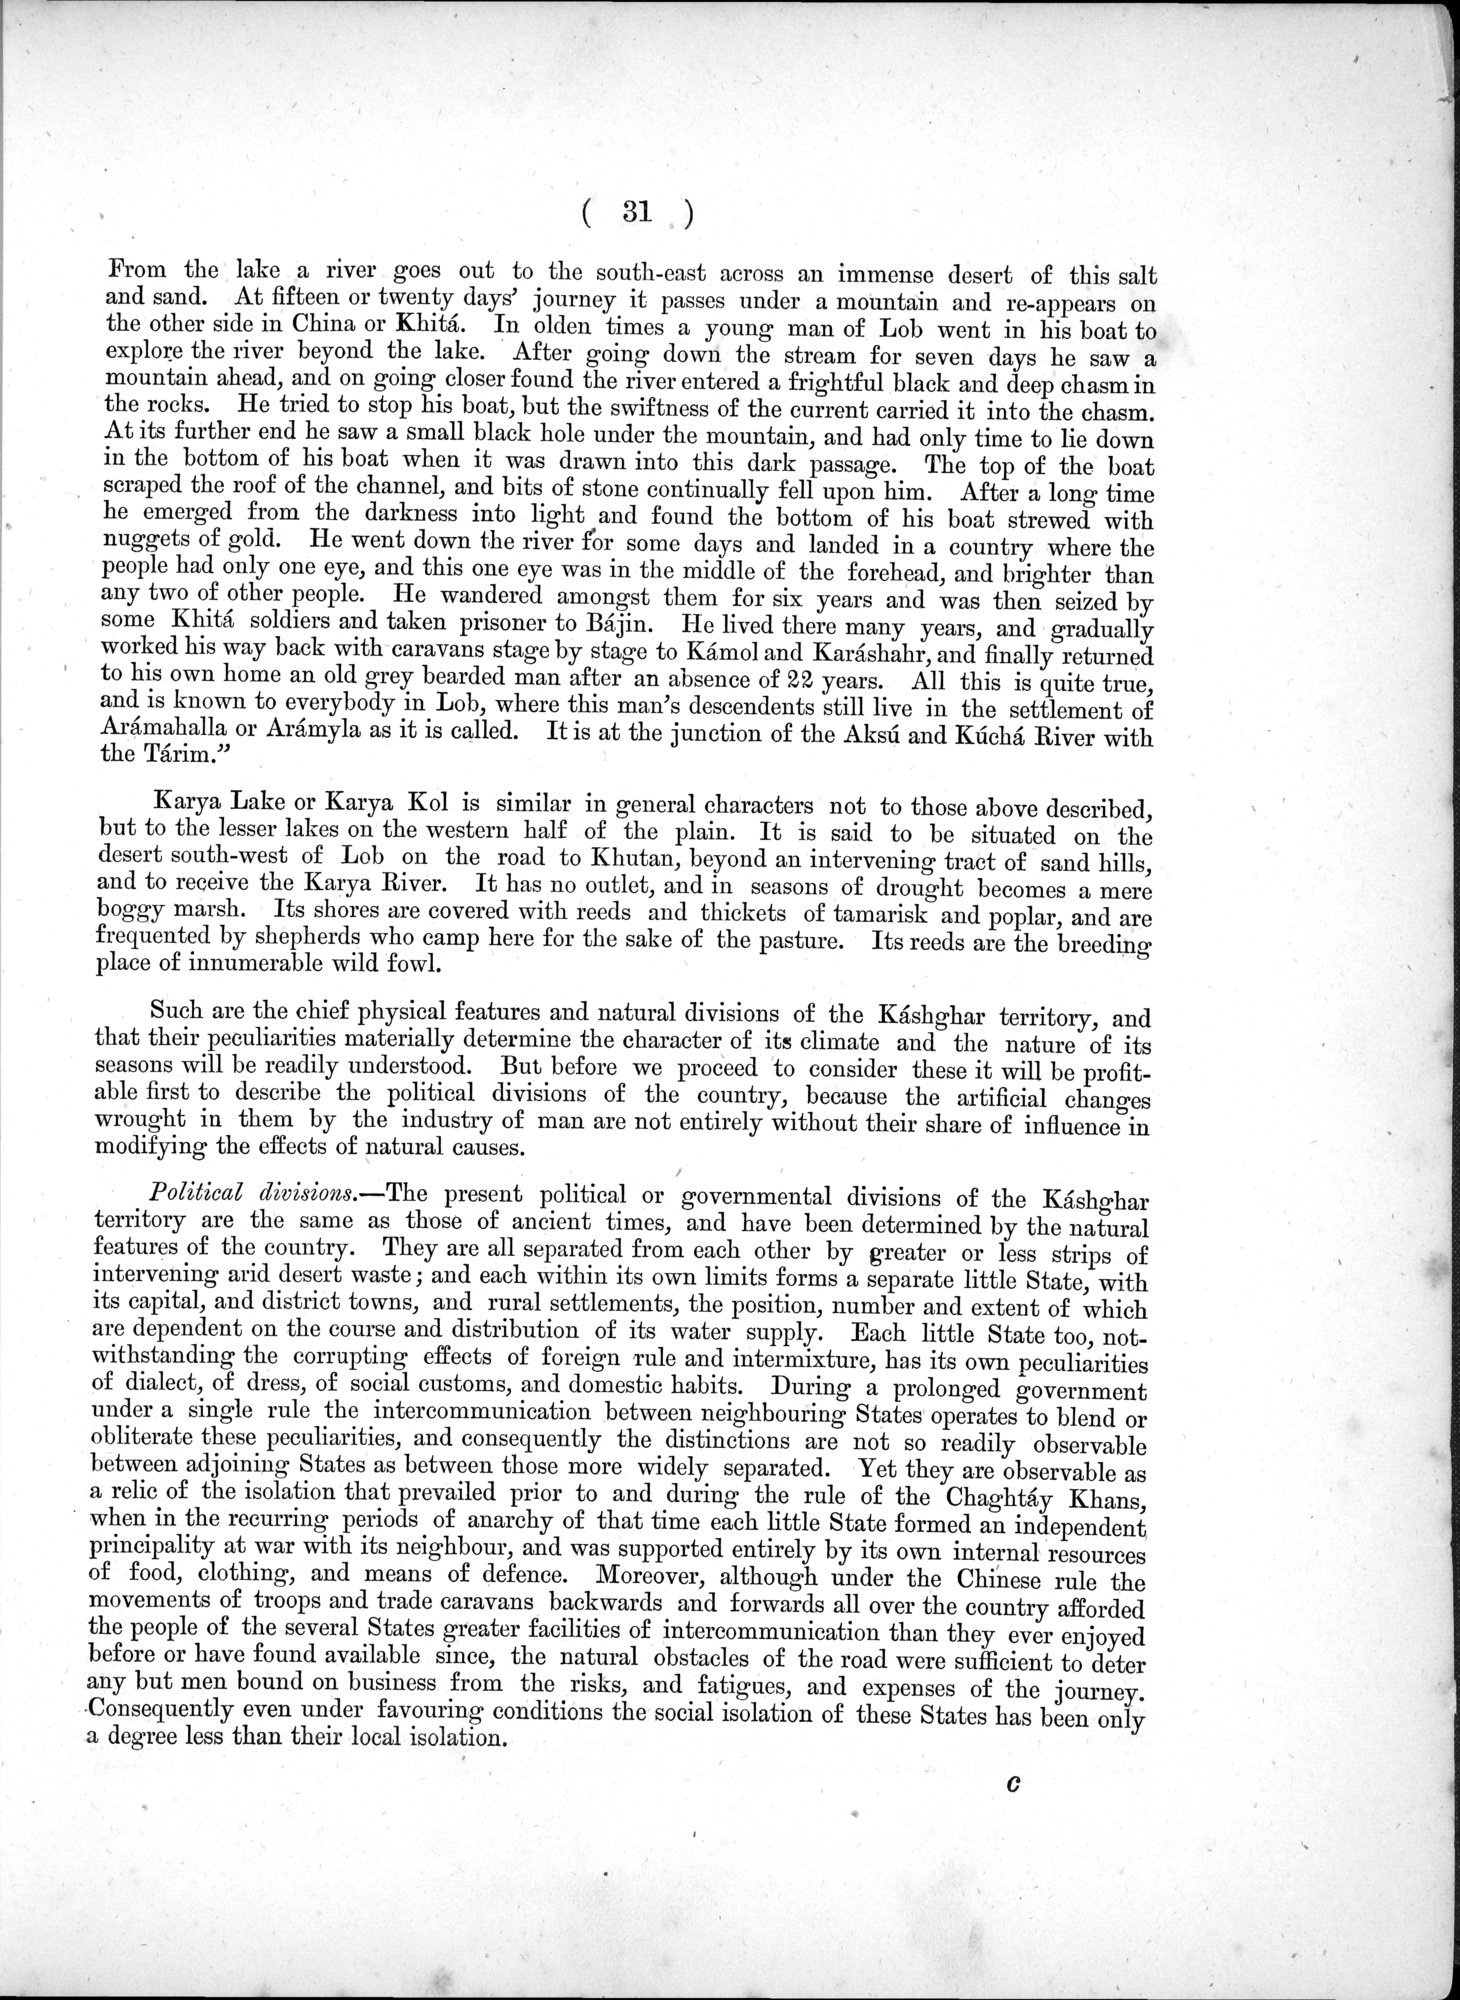 Report of a Mission to Yarkund in 1873 : vol.1 / Page 63 (Grayscale High Resolution Image)